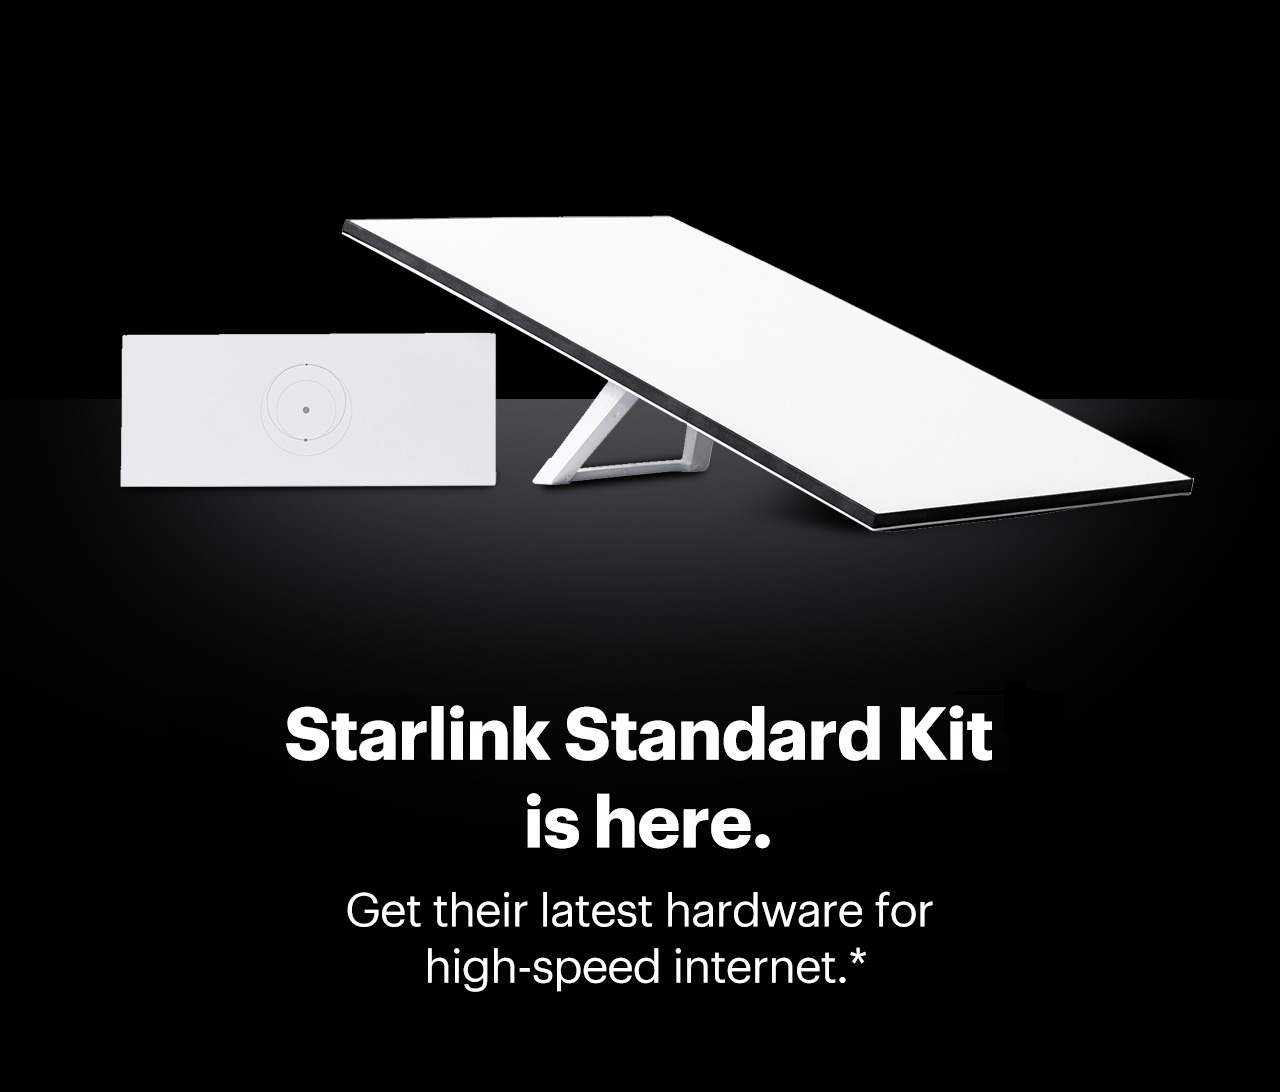 Starlink Standard Kit is here. Get their latest hardware for high-speed internet. Reference disclaimer.